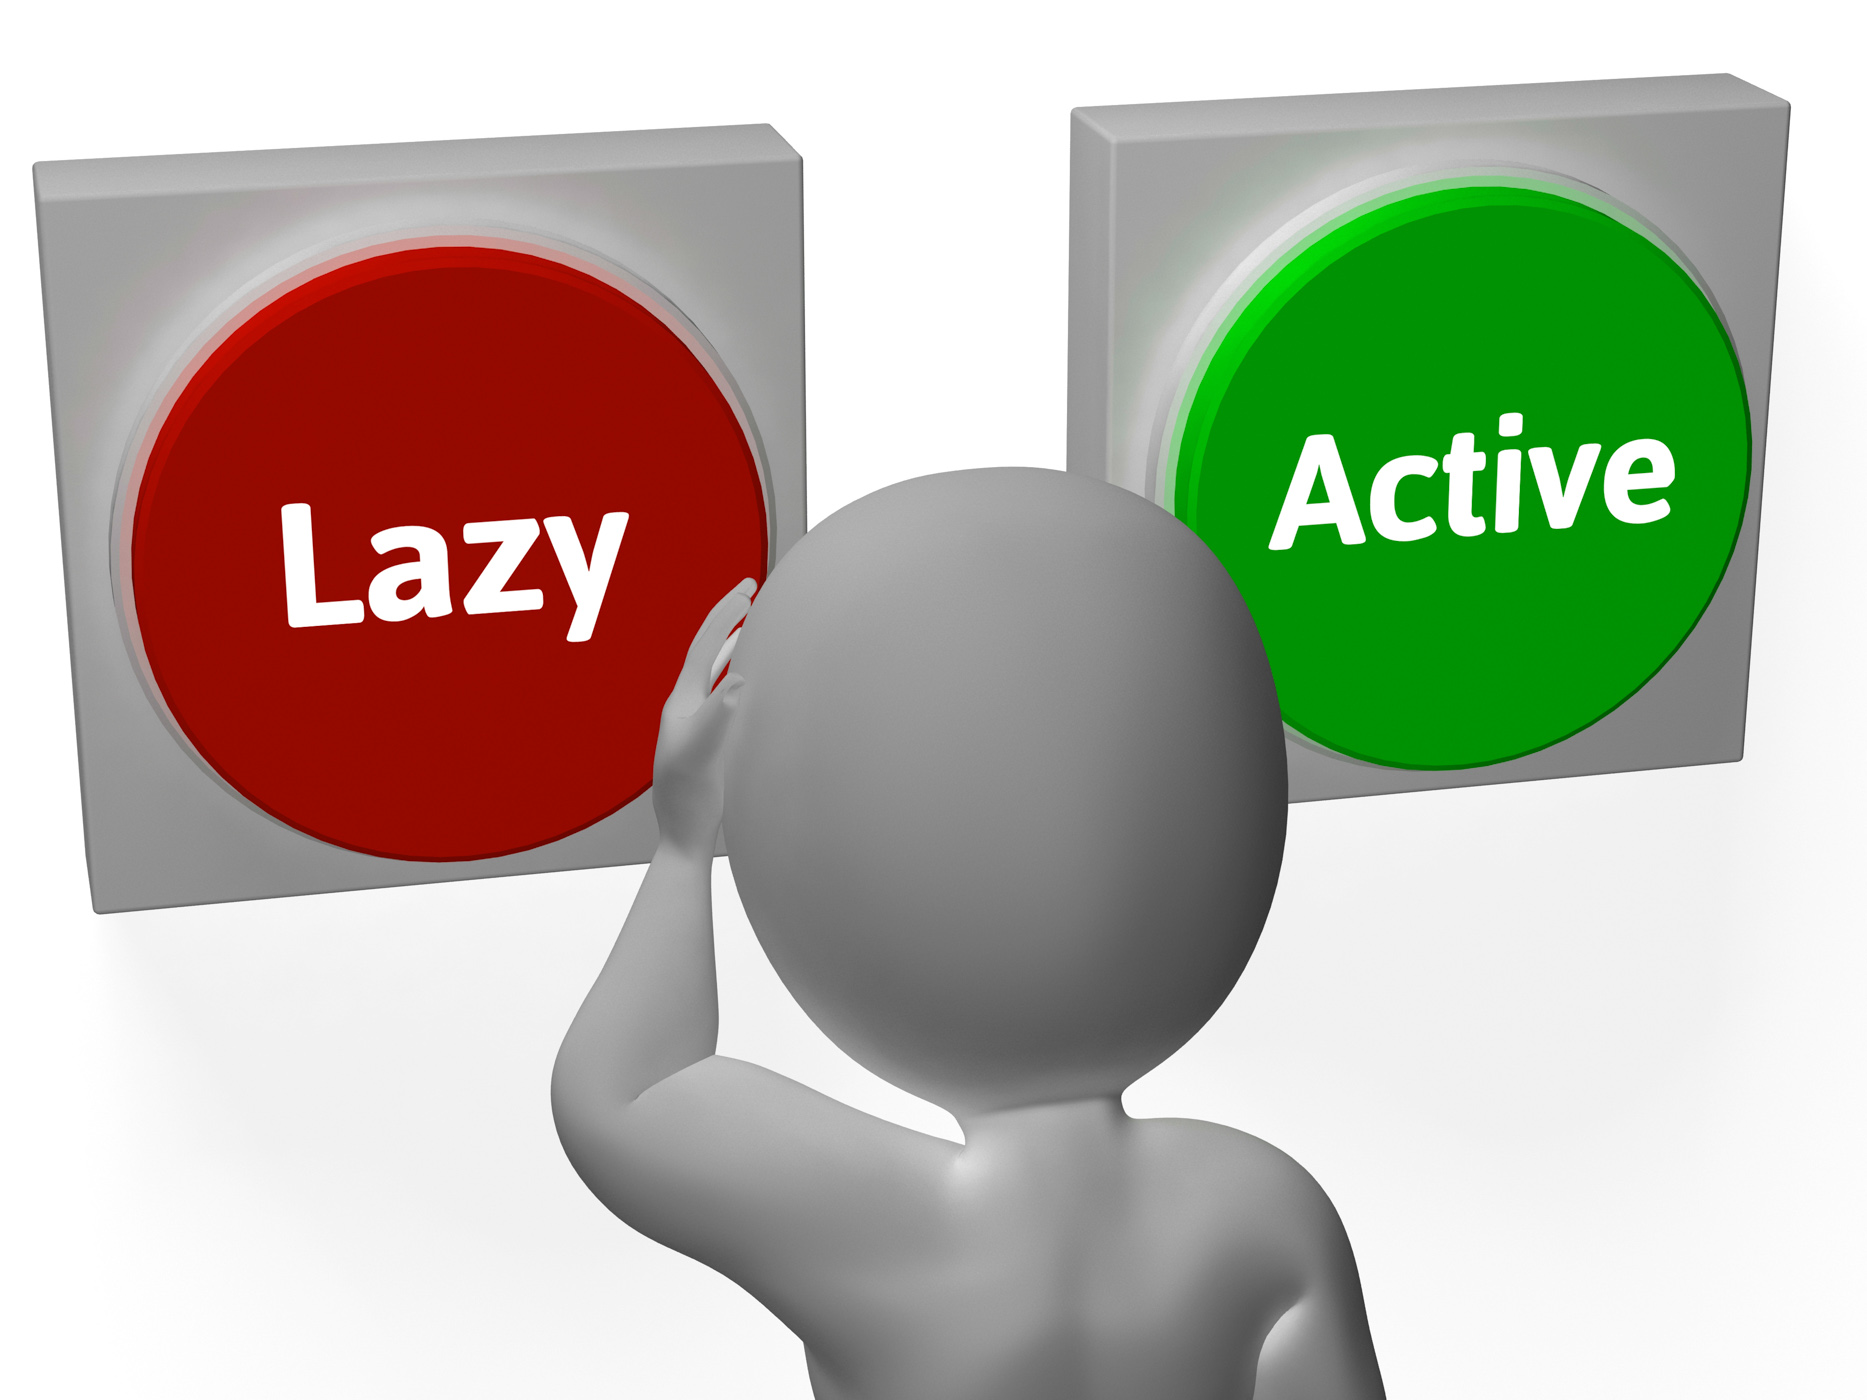 Lazy active buttons show lethargic or effort photo